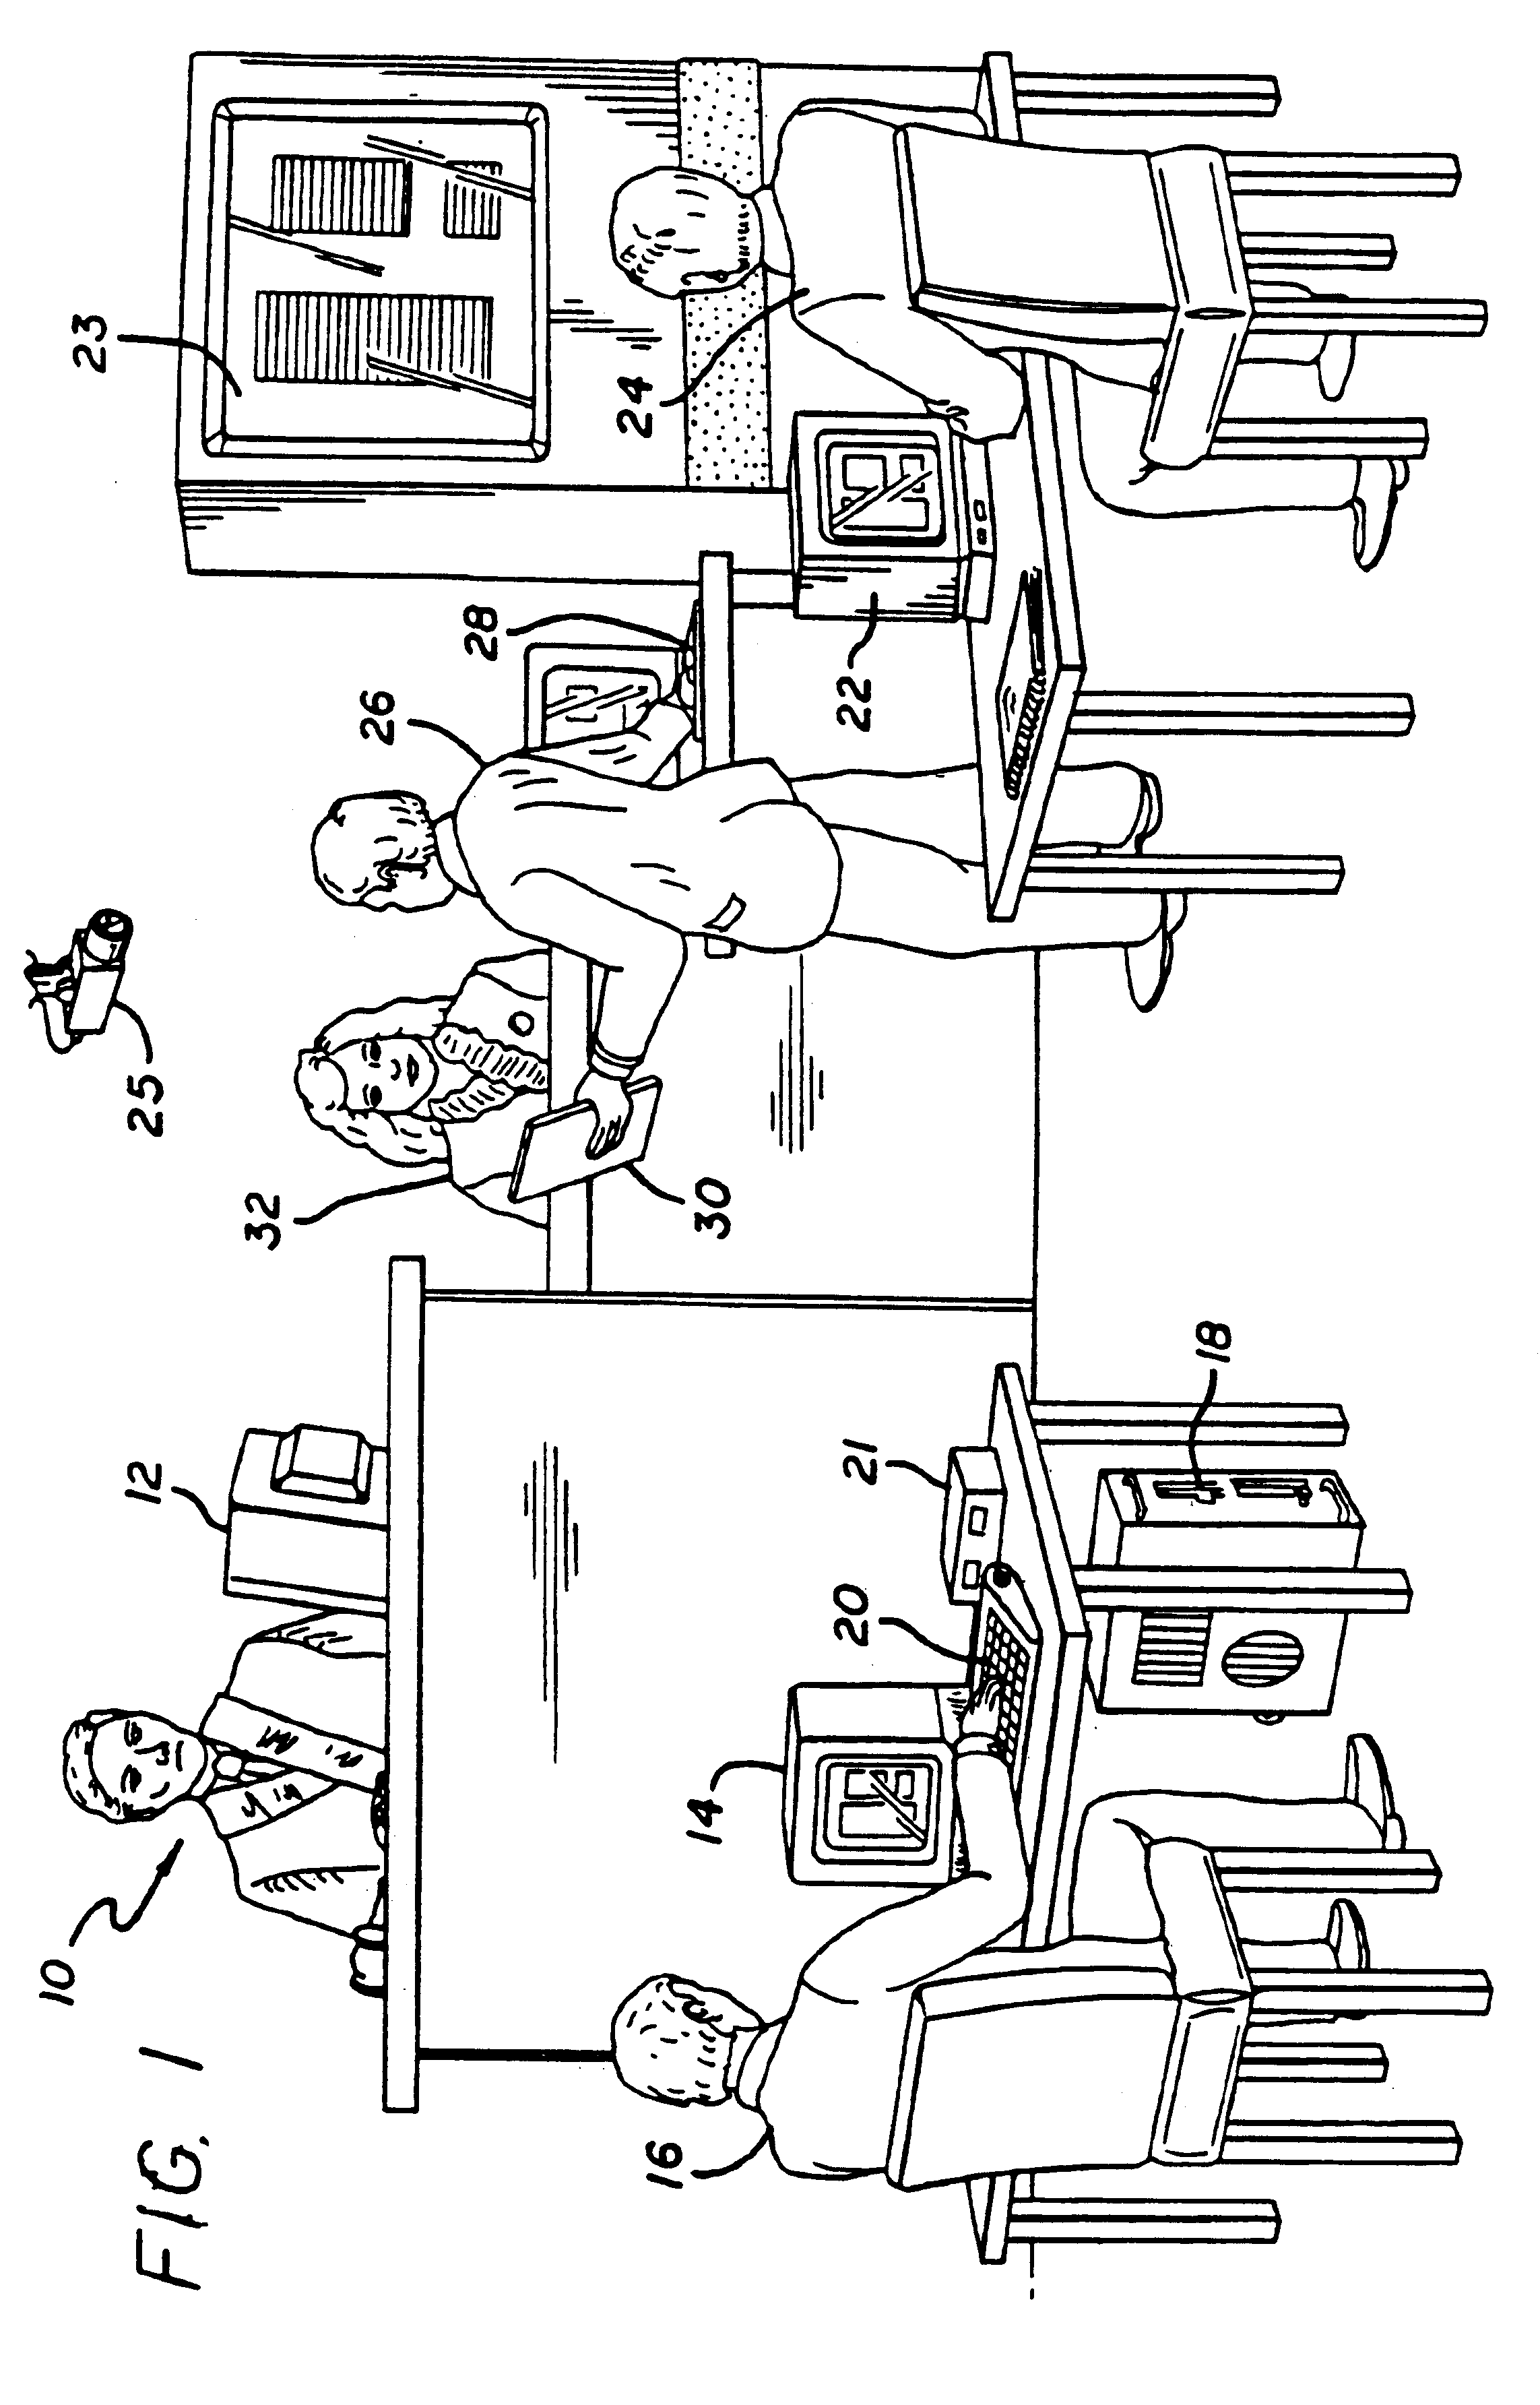 Computer-assisted interactive method and apparatus for making a multi-media presentation